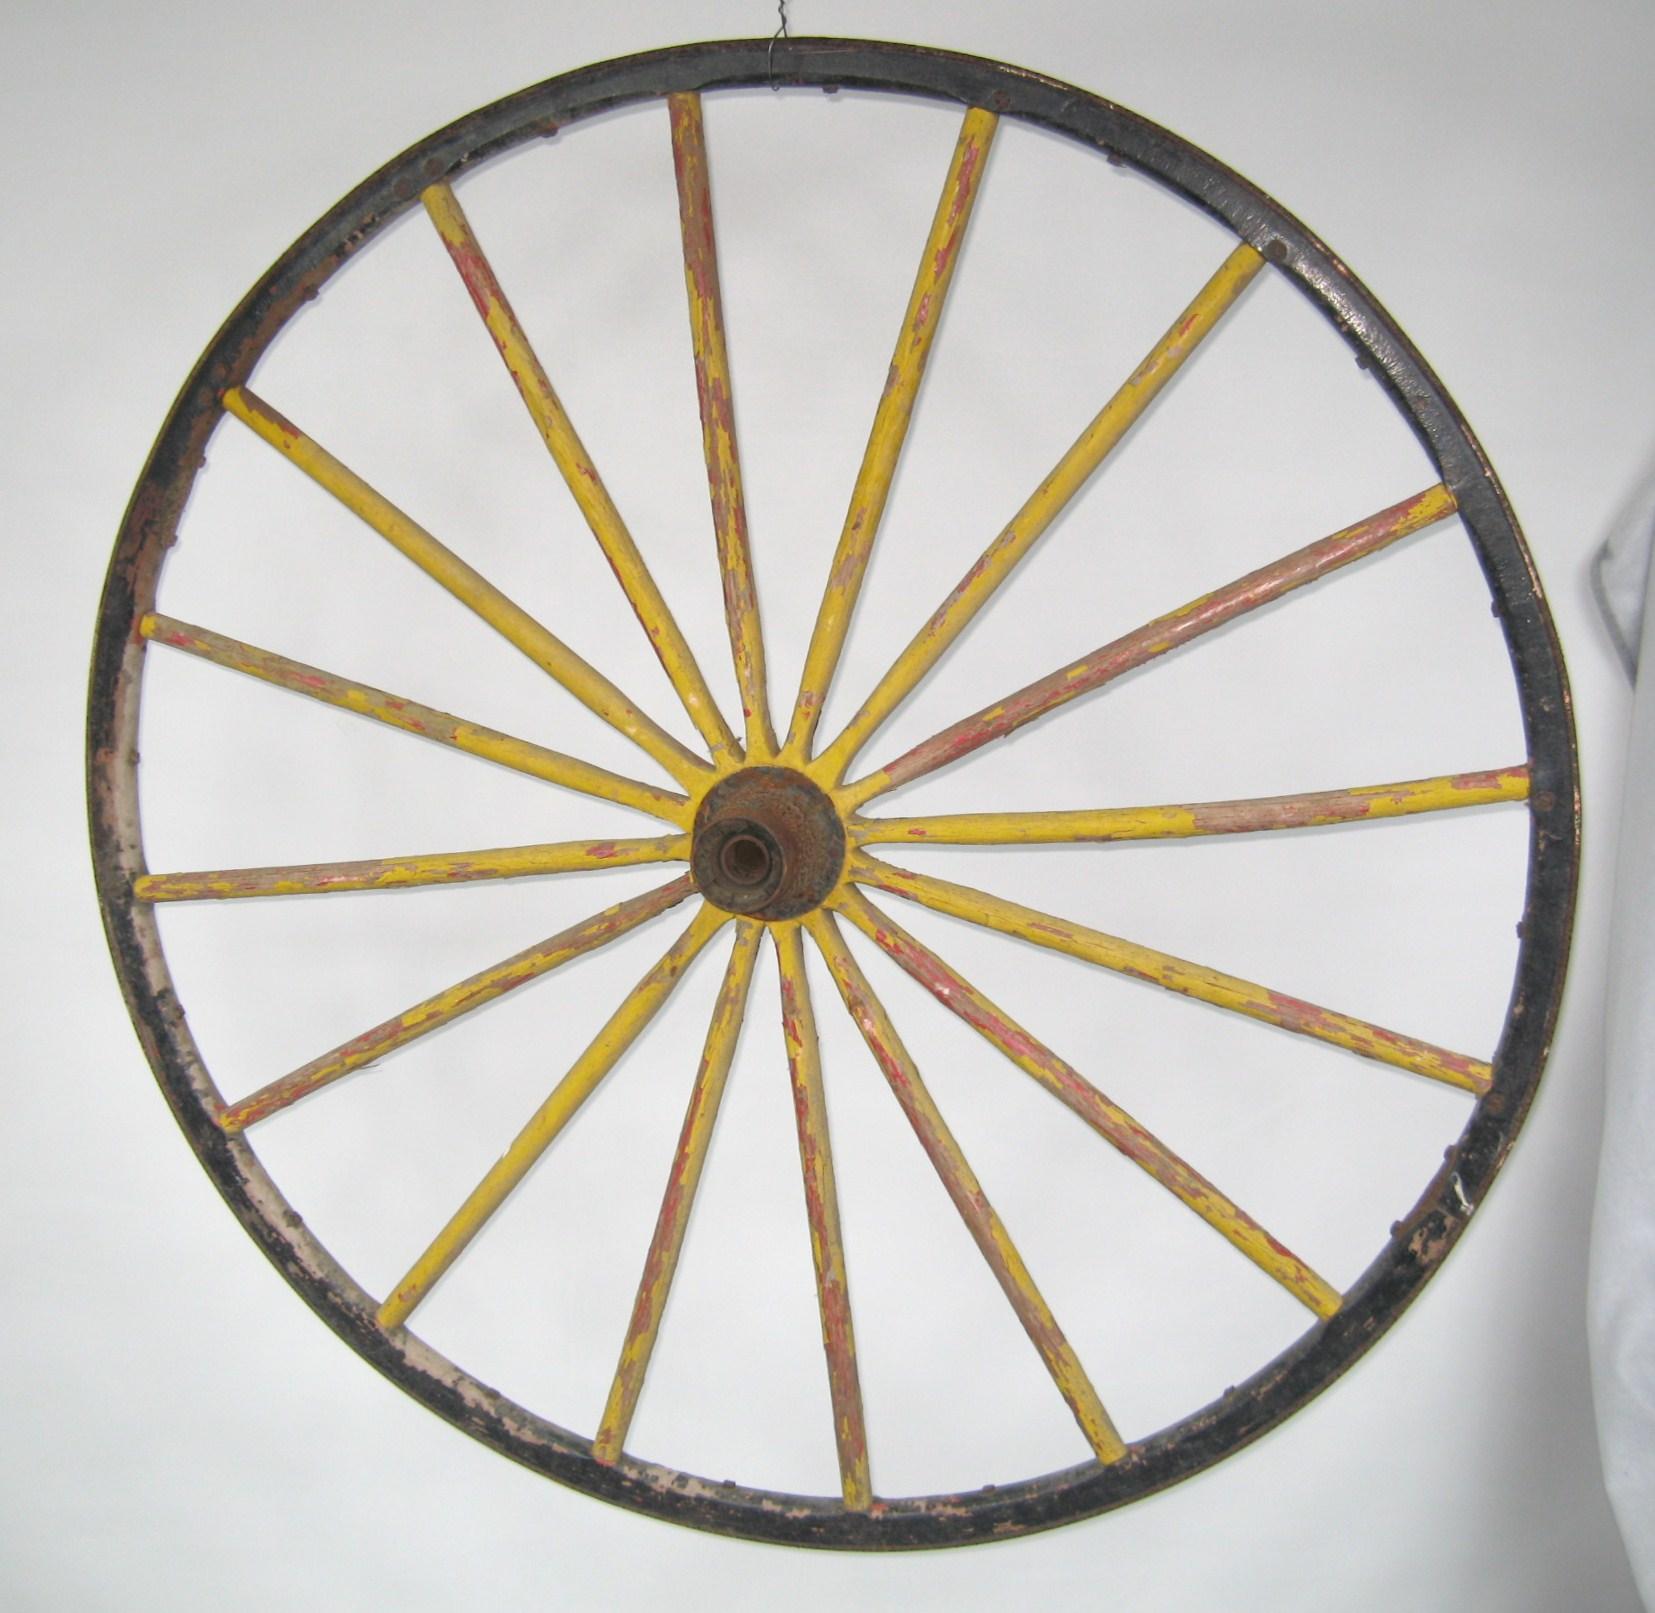 Early set of large wood wagon fire engine wheels, great yellow and hits of red paint showing.